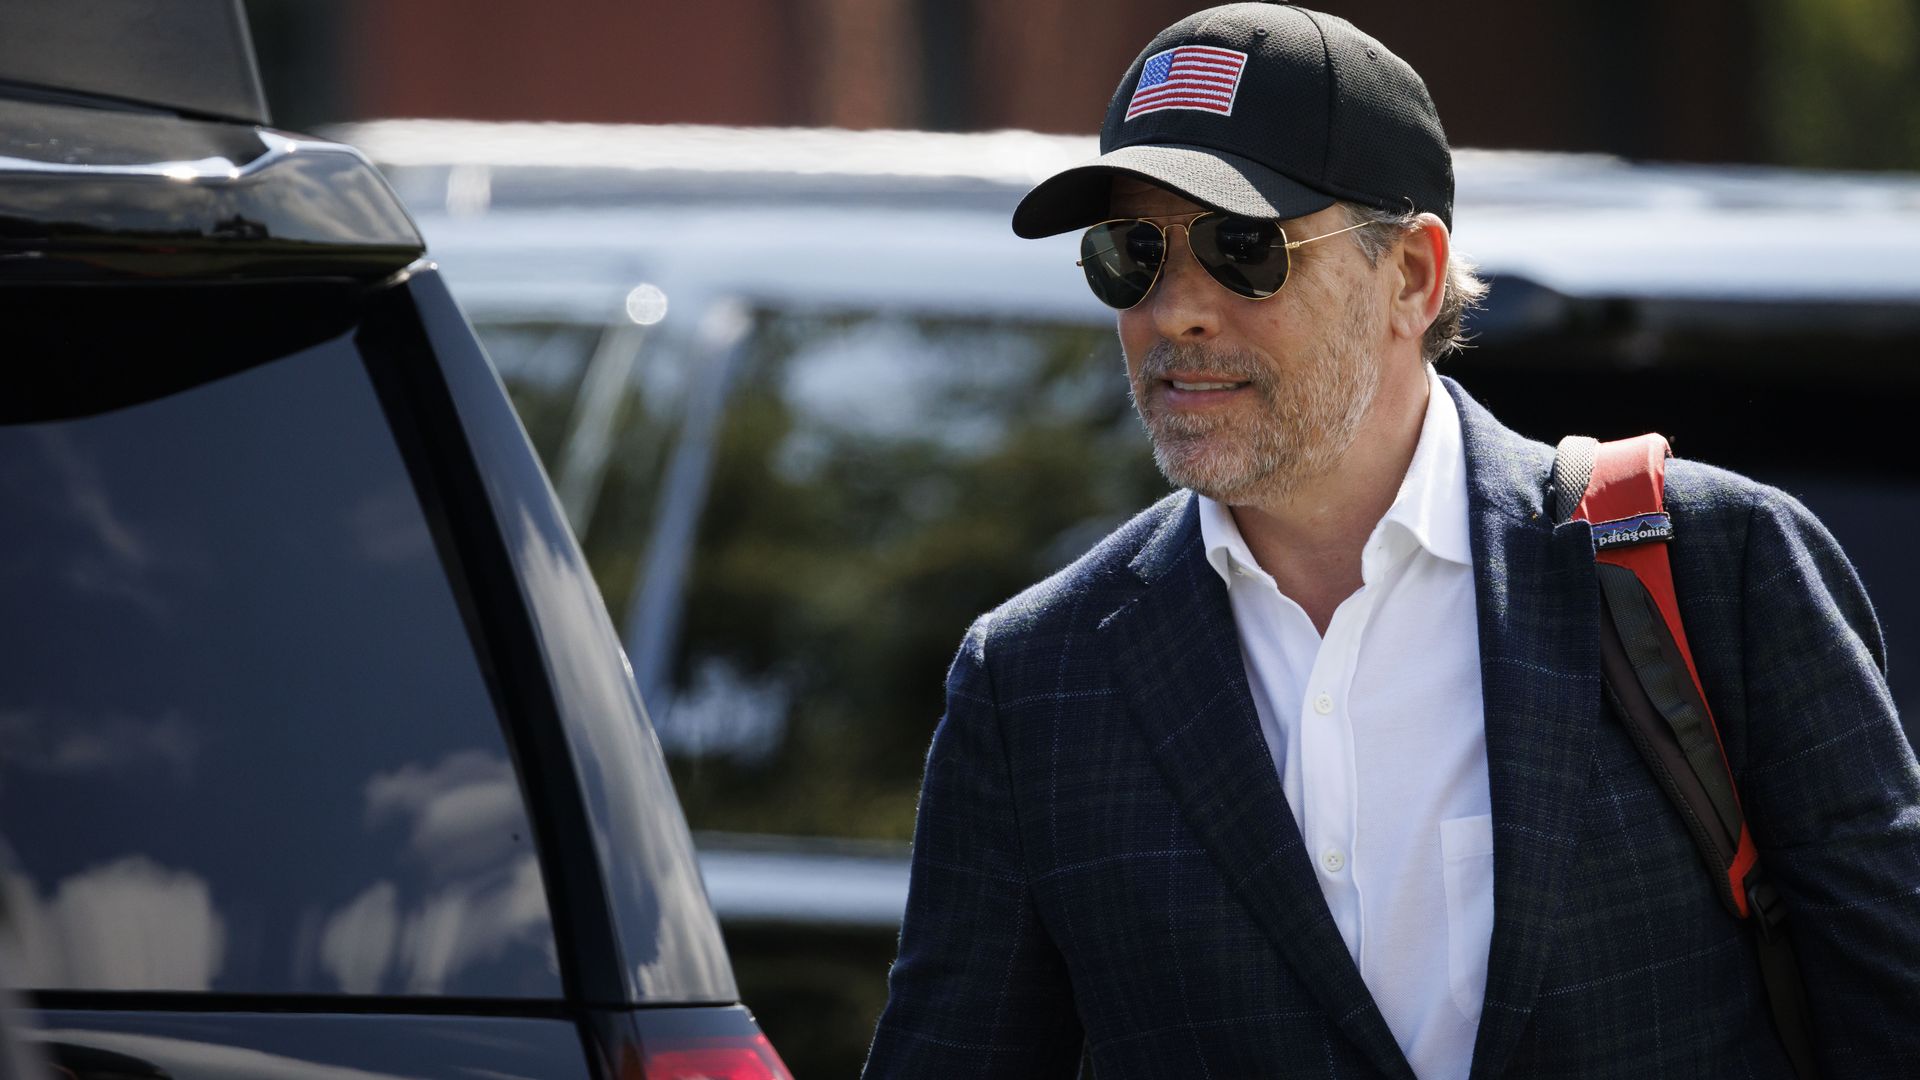 Hunter Biden, wearing a blue suit, and a black hat with an American flag on the front walks behind two SUVs.